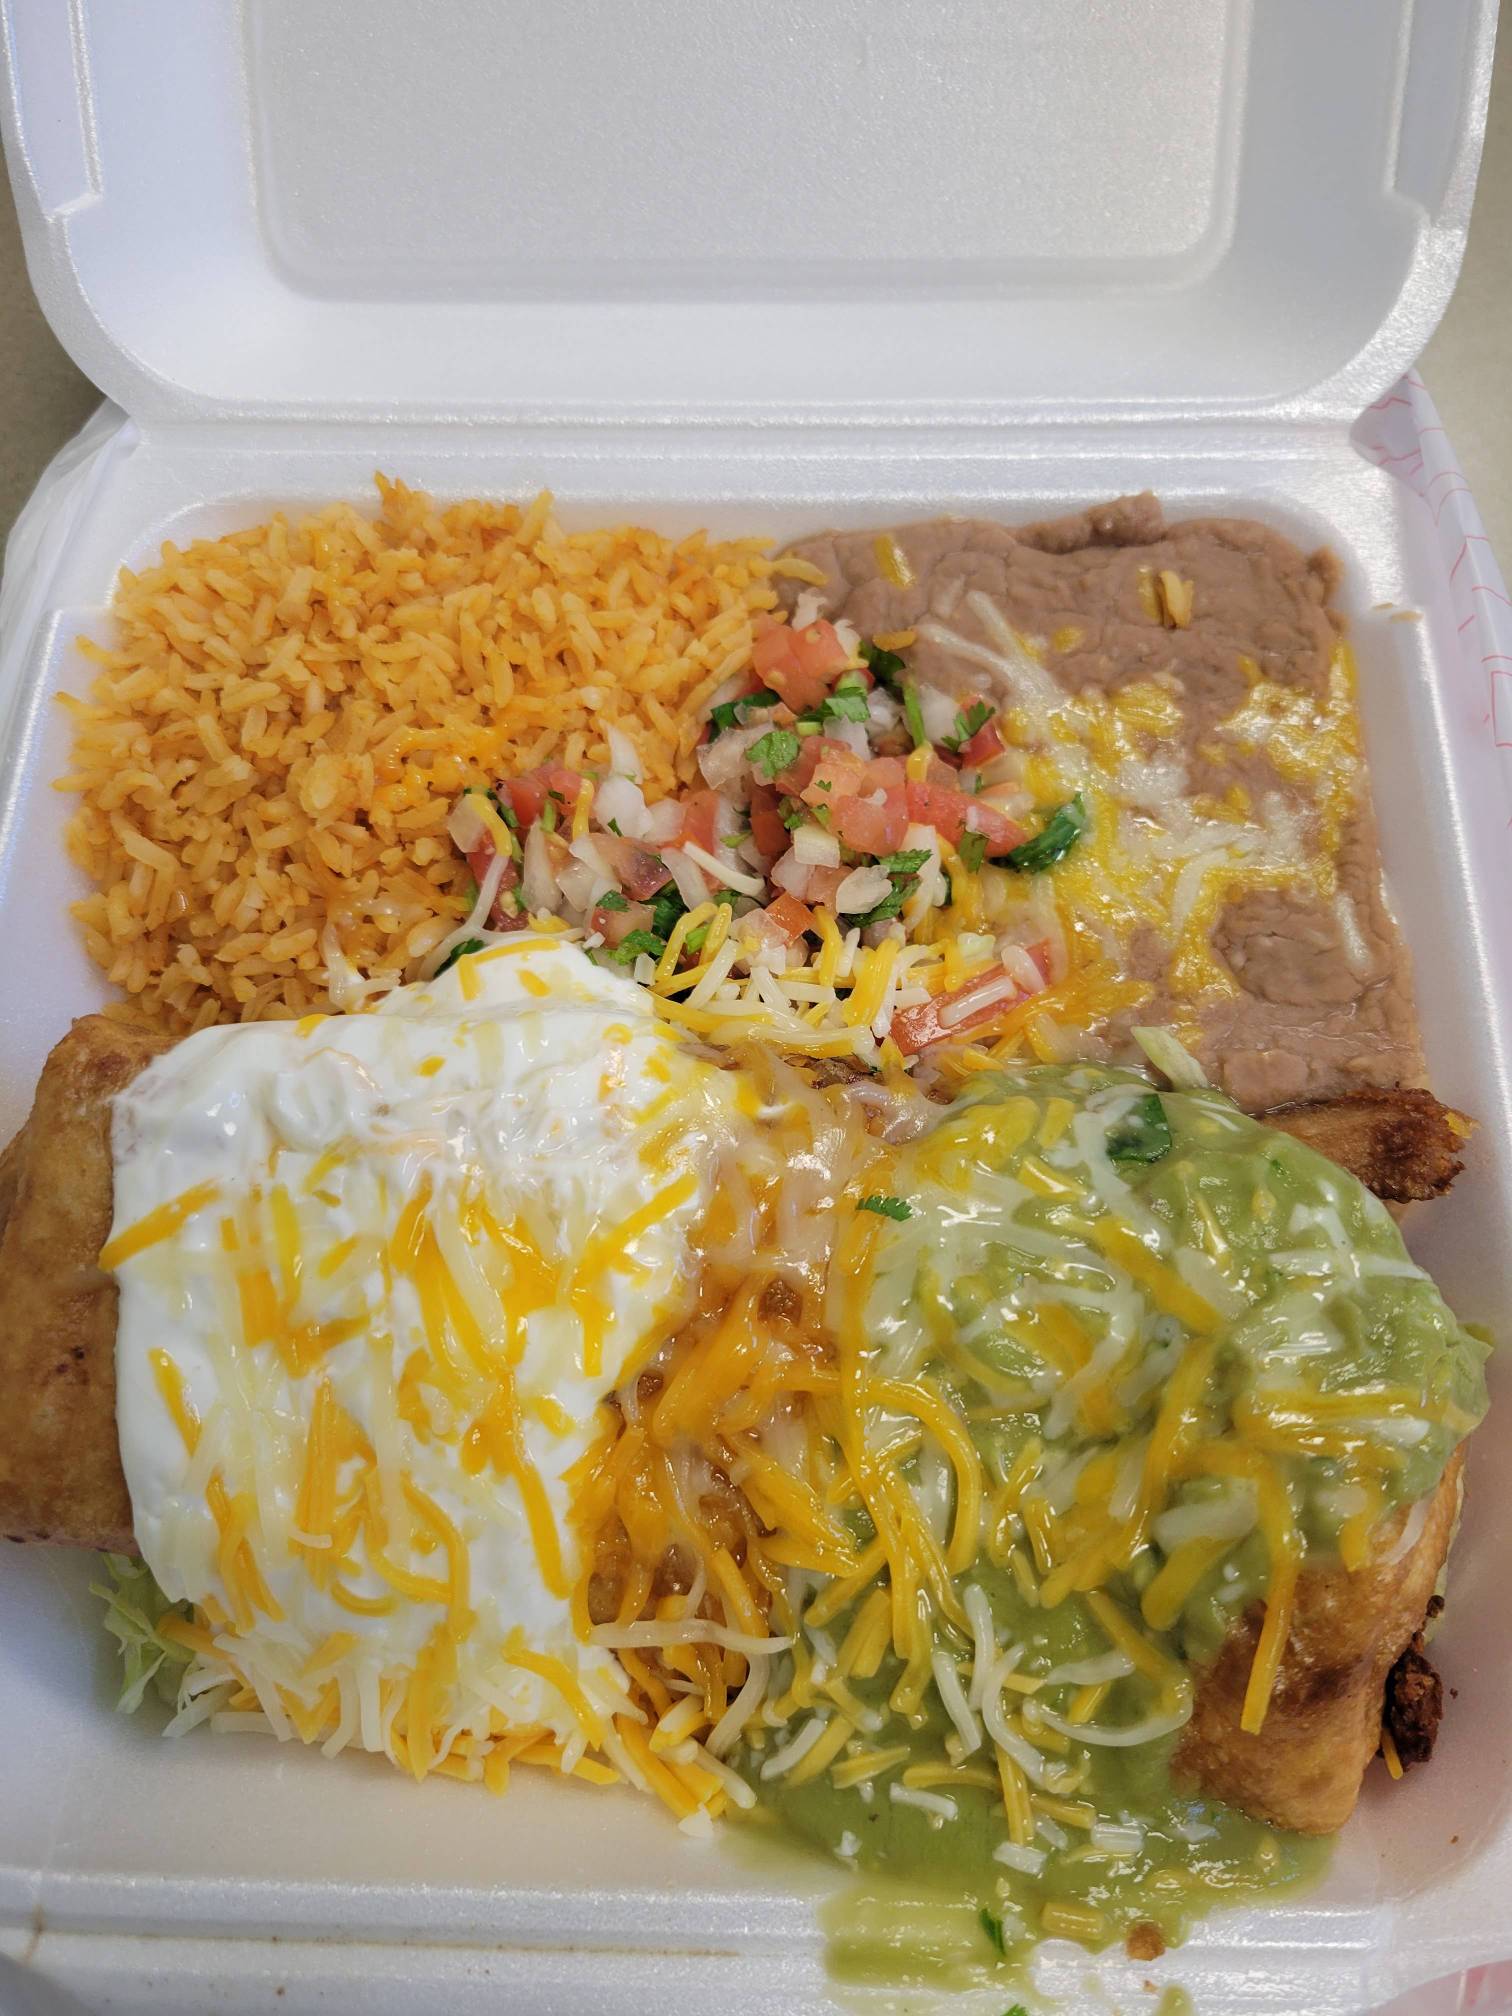 D'Leon's Taco Rico - Delicious and affordable SIDE ORDERS! 🥪 Check them  out:  Call us to order!  308-221-6018 📱 (North Platte, Nebraska) Delivery: 402-489-0505 🛵 (in our  Lincoln location) Enjoy the